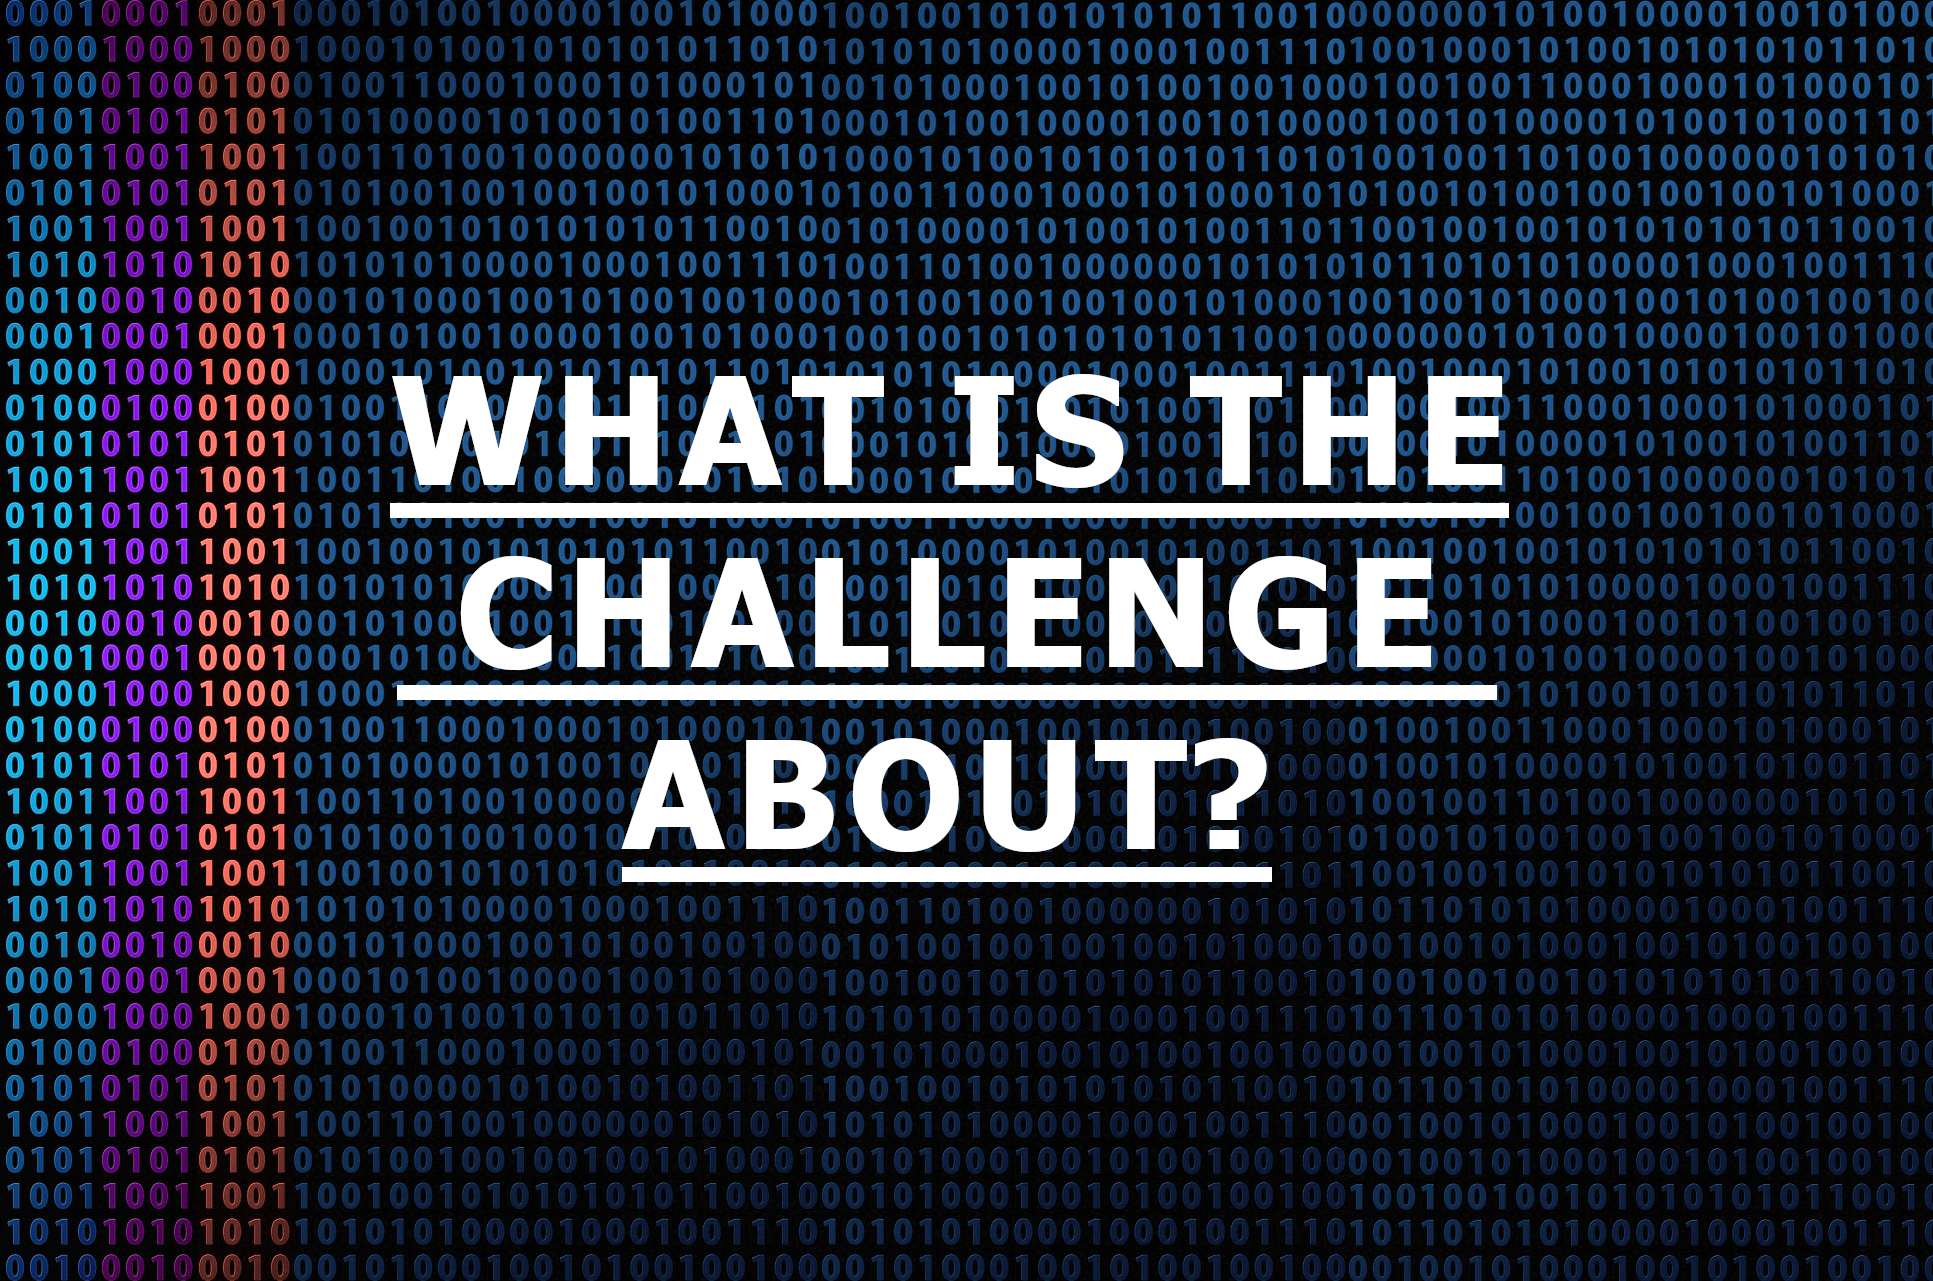 What's the challenge about?